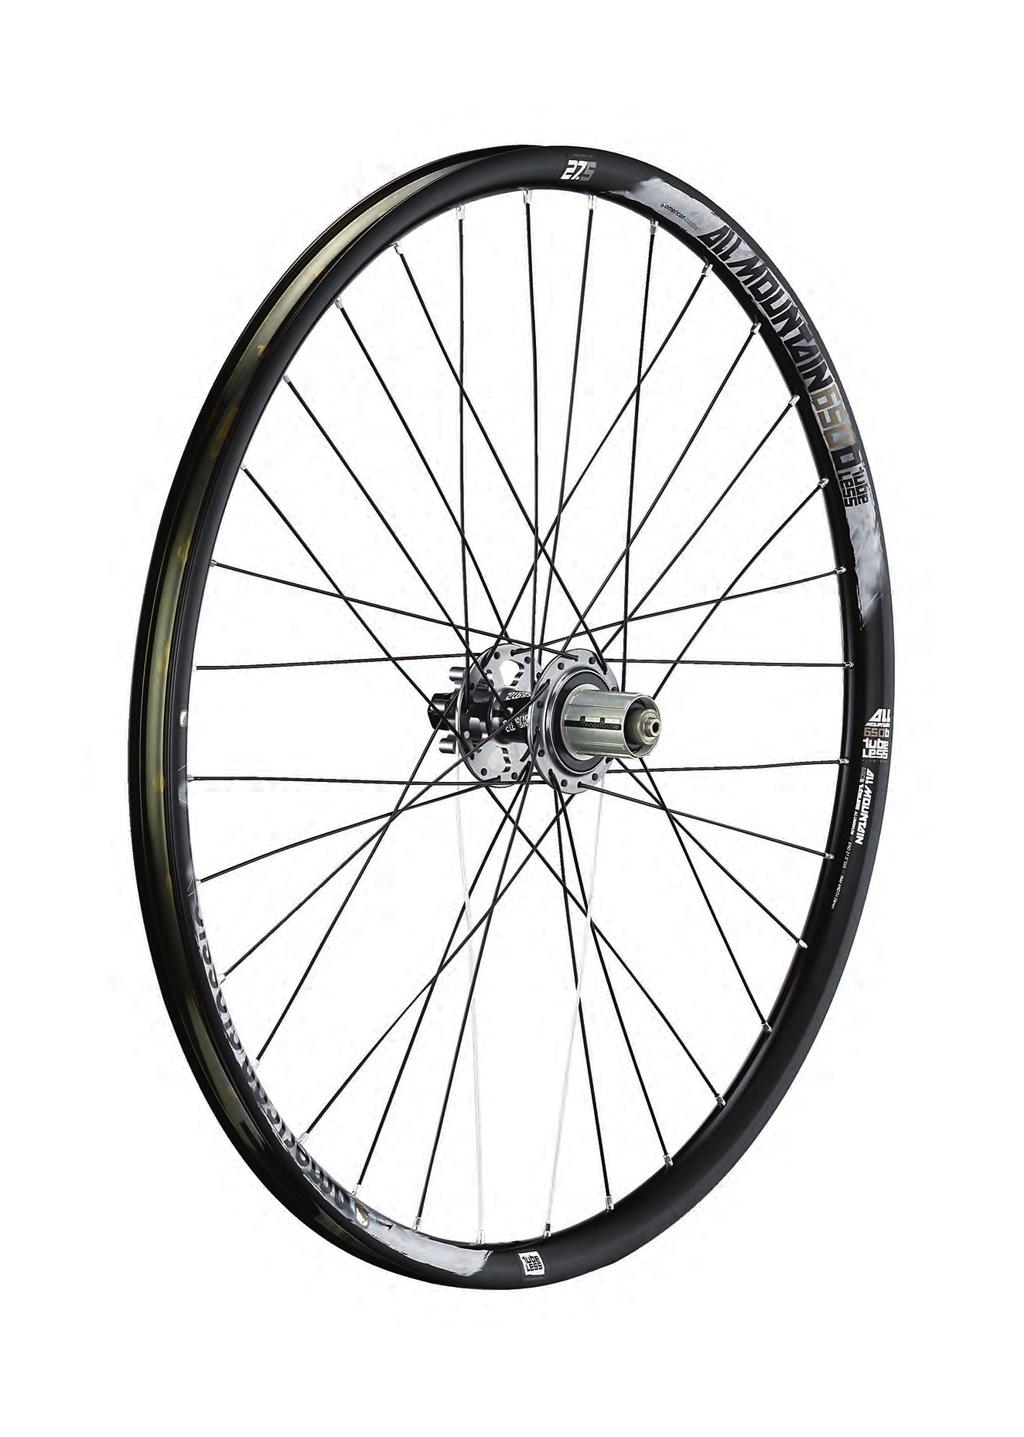 TBMHEELS 28 24 23 LL OUNTAIN 26 / 650B / 29 TUBELESS The All Mountain Tubeless Disc wheelset is the stronger, workhorse version of our proven cross country tubeless wheels in 26, 29 and new 650B.